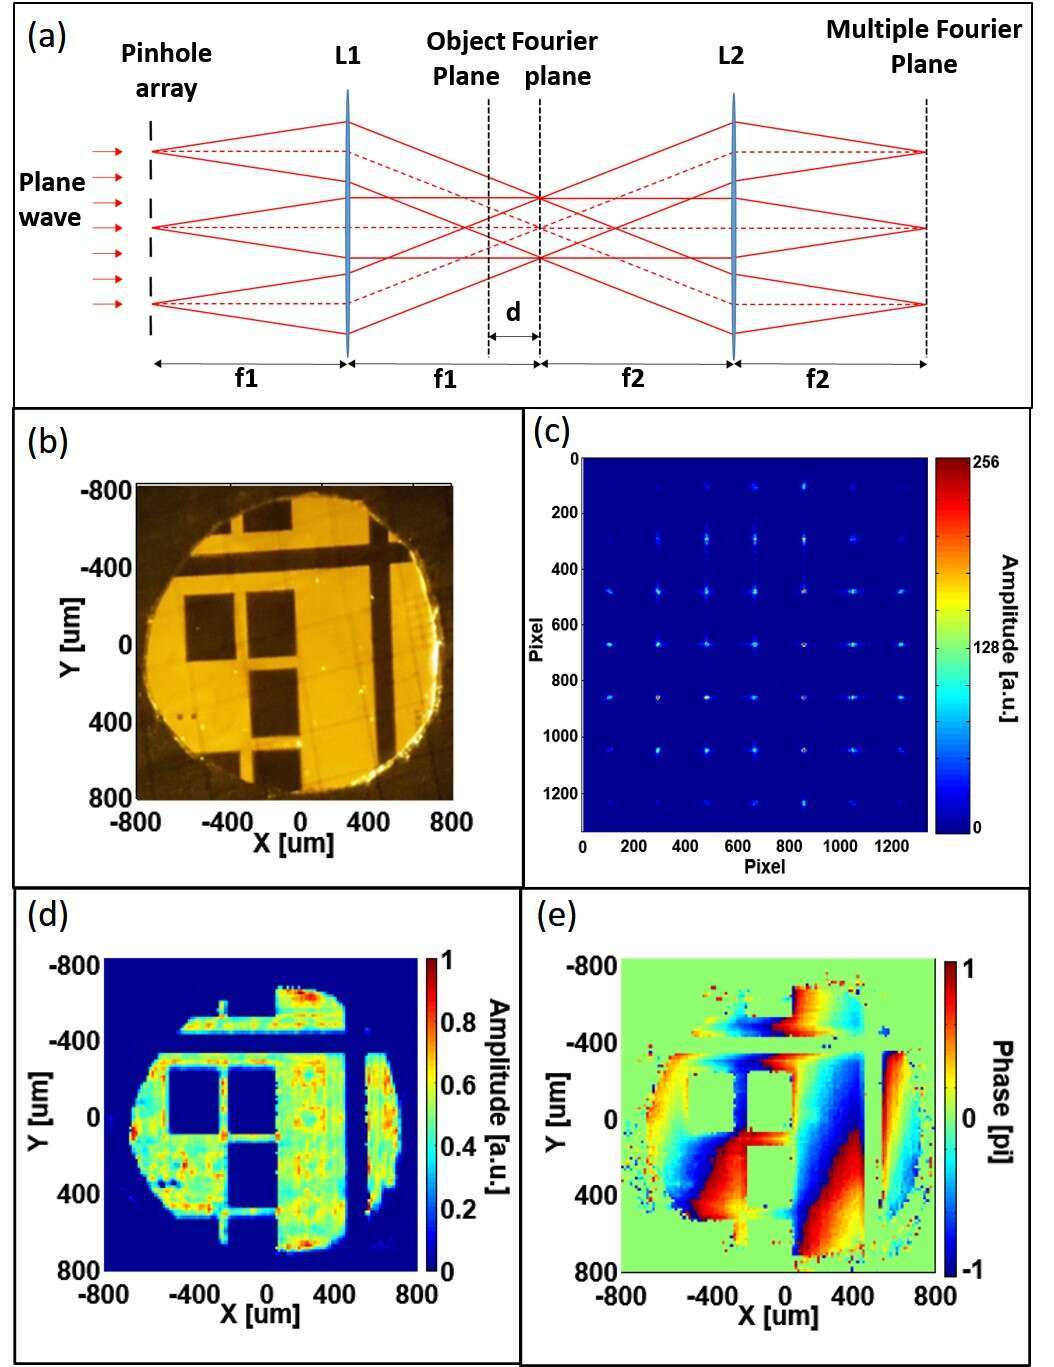 Figure 1: Experimental single-shot ptychography (a) schematic of single-shot ptychographic microscope with ray tracing. (b) Image of the object measured by conventional microscope with x10 magnification. (c) Measured diffraction pattern. Ptychographic reconstruction of the amplitude (d) and phase (e) from the measured diffraction pattern.